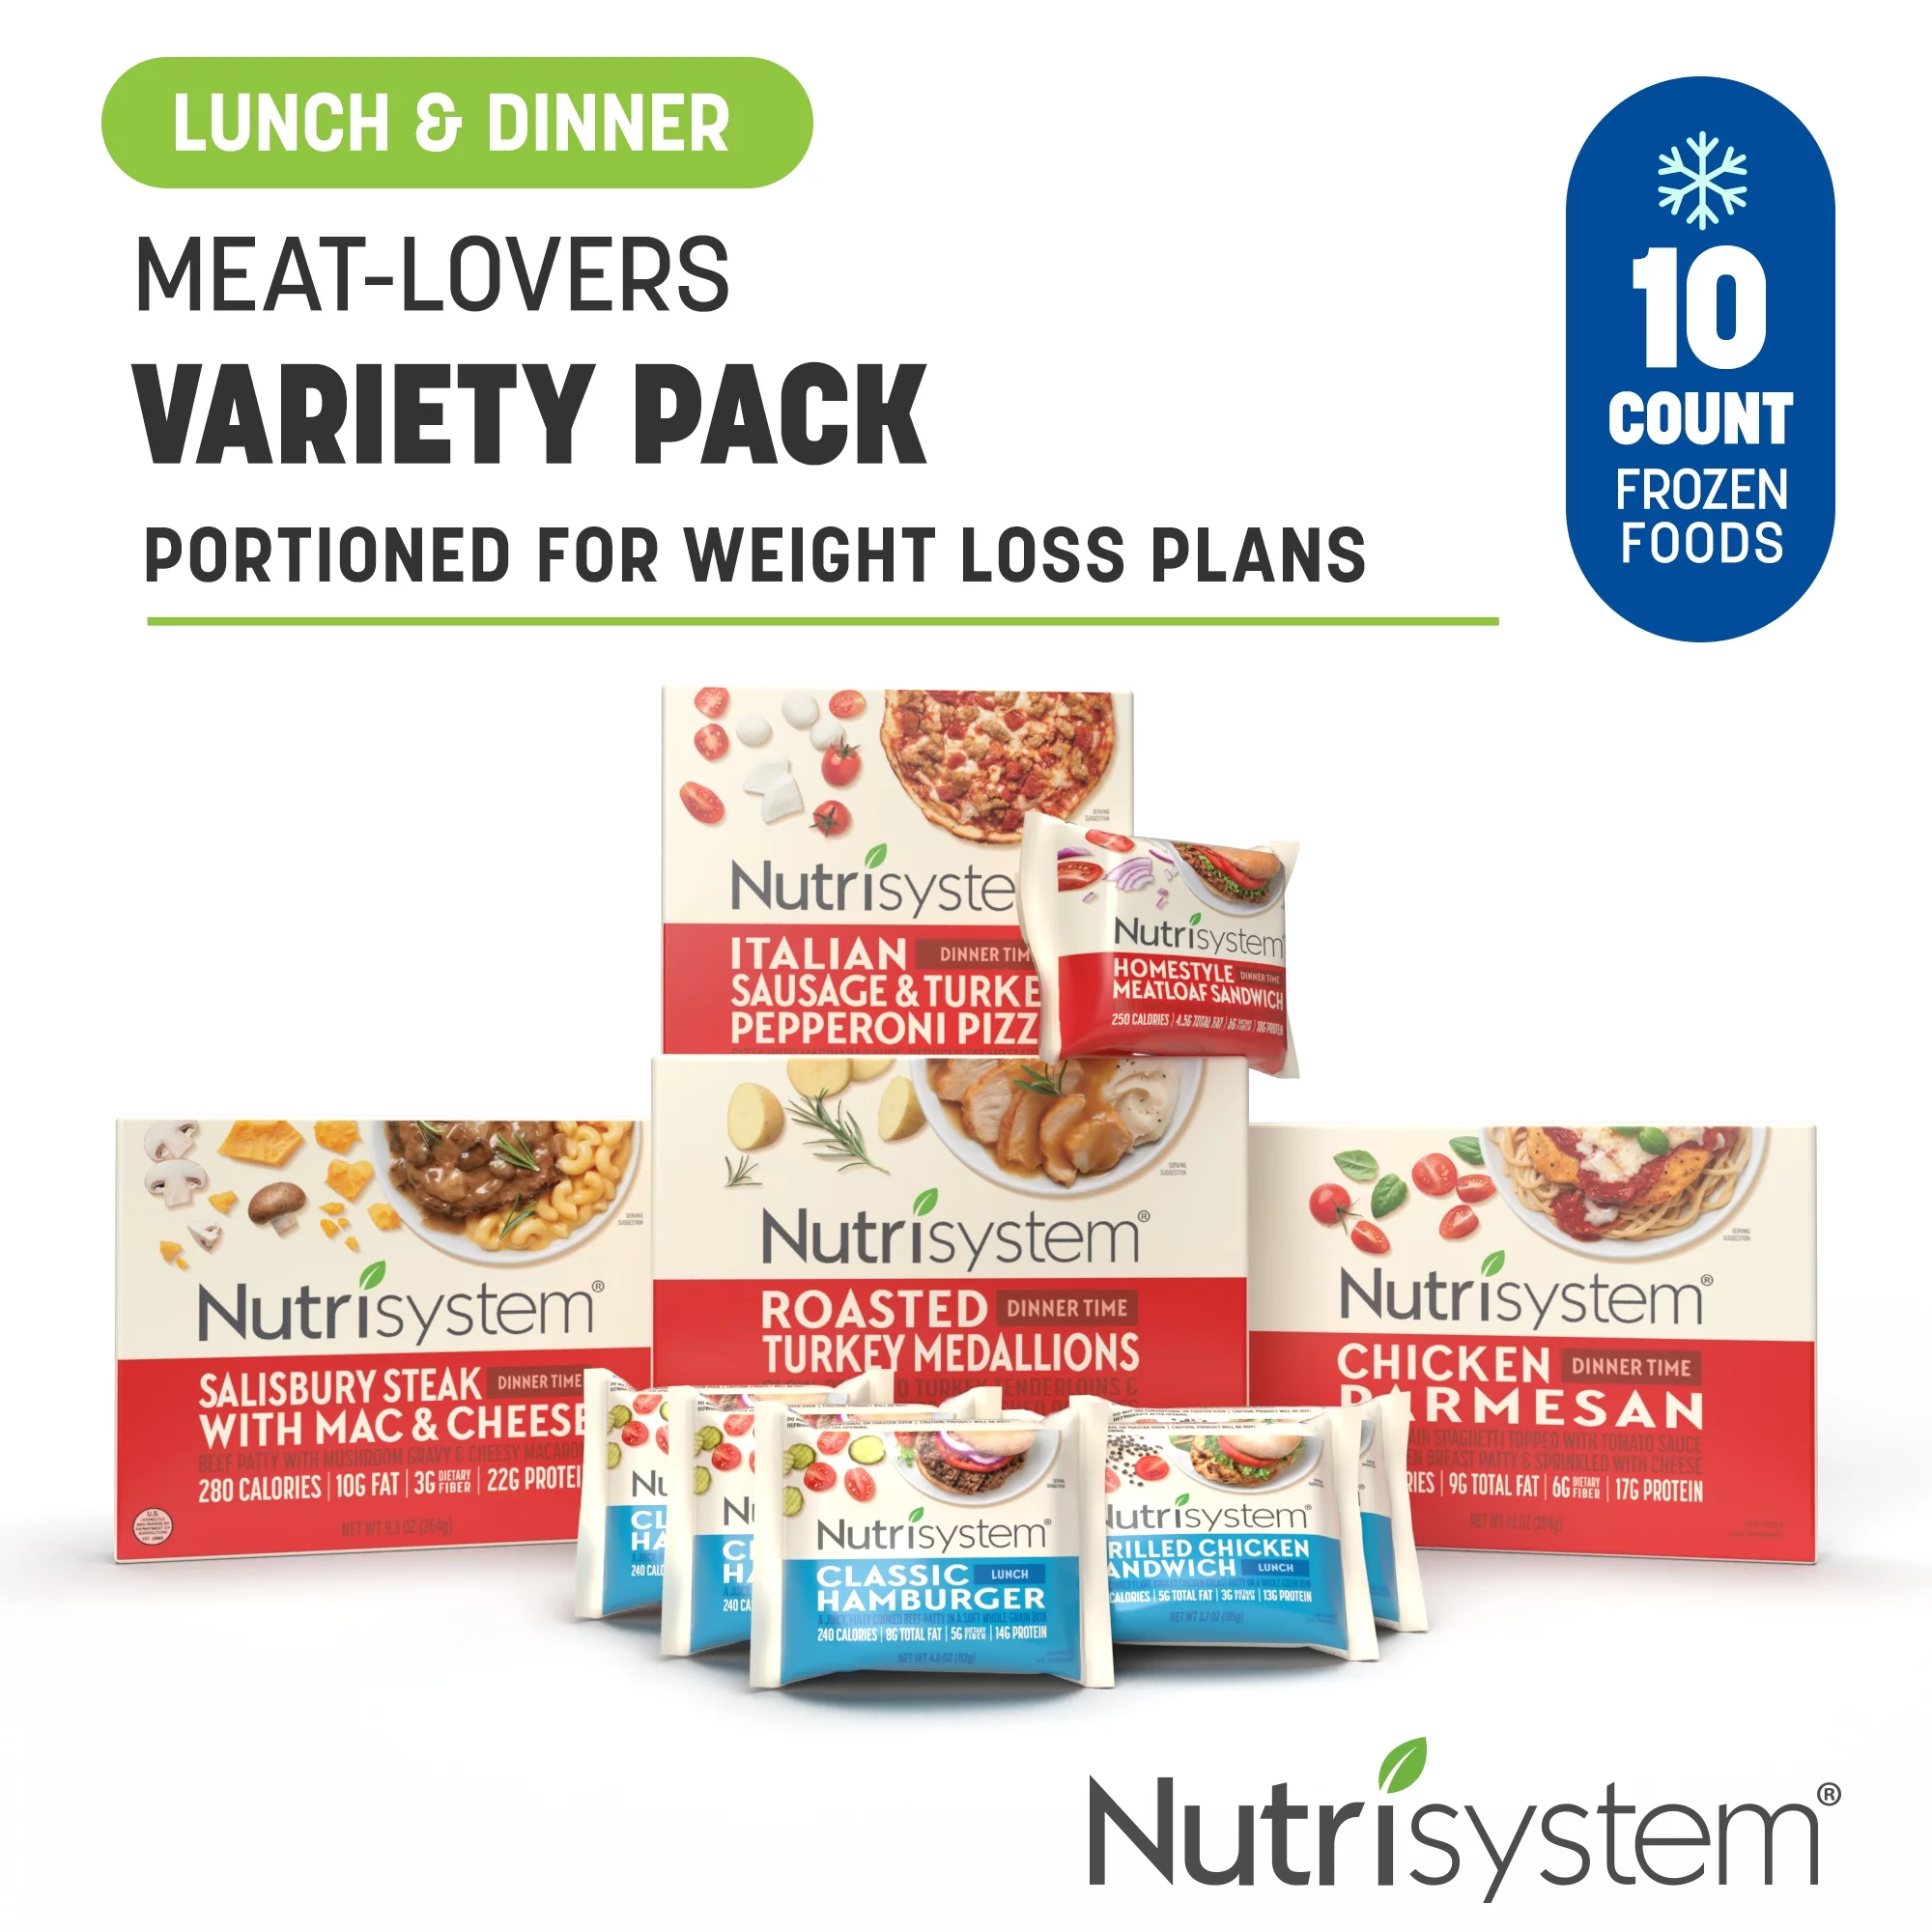 Nutrisystem Frozen Meat Lovers Variety Pack, 10 Count